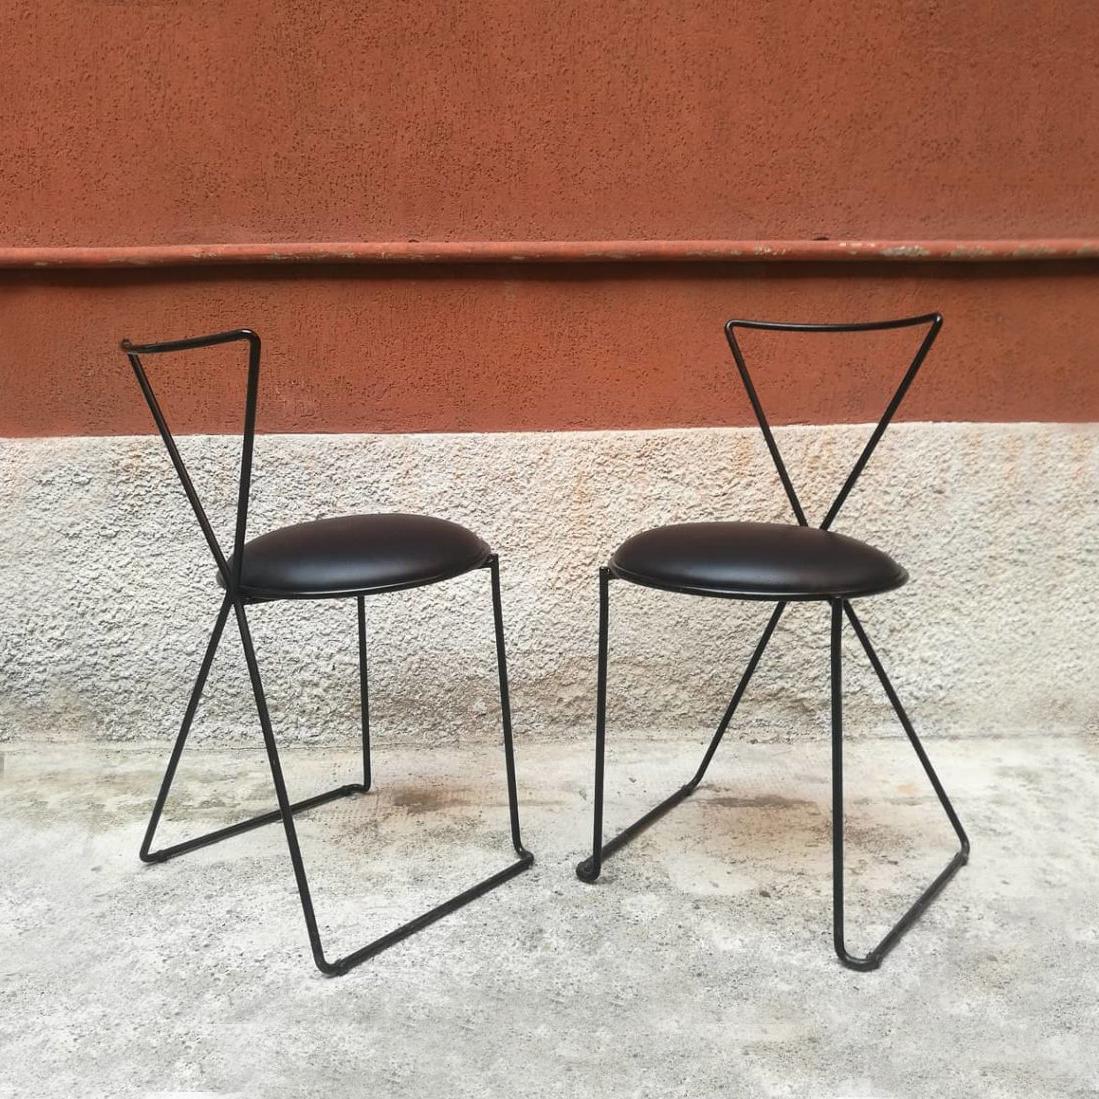 Italian Postmodern set of 4 black painted iron rod and sky chairs, 1980s
Set of 4 black painted iron rod chairs with sky on the seat, always in black.
Italian design, in perfect condition.
Measures: 46 x 39 x 78 H cm.